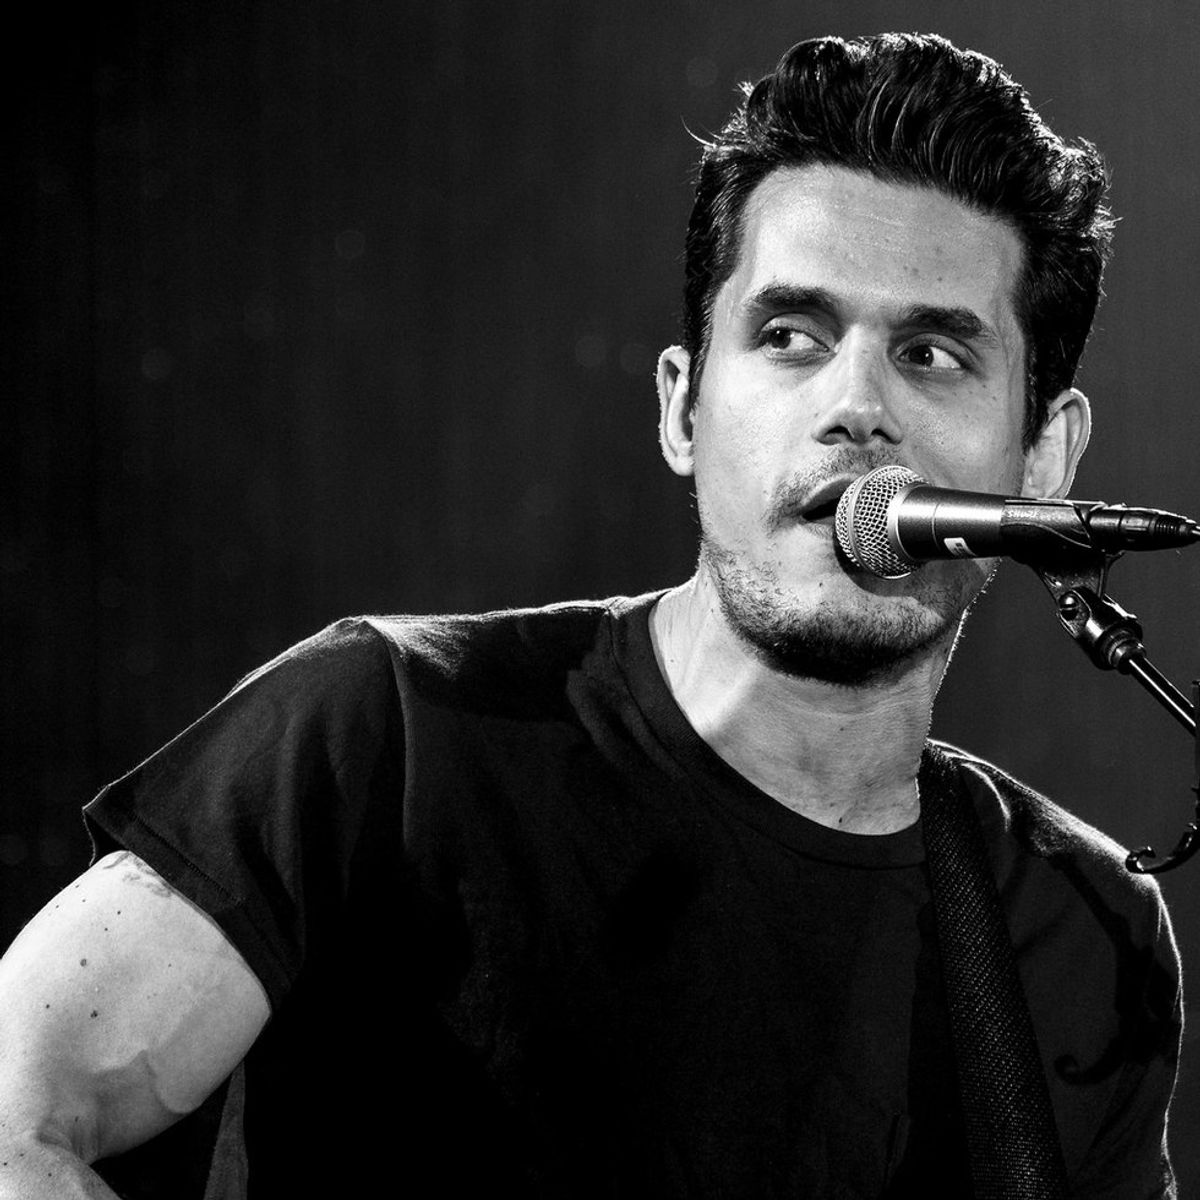 18 John Mayer Tweets That Will Make You Want To Follow Him